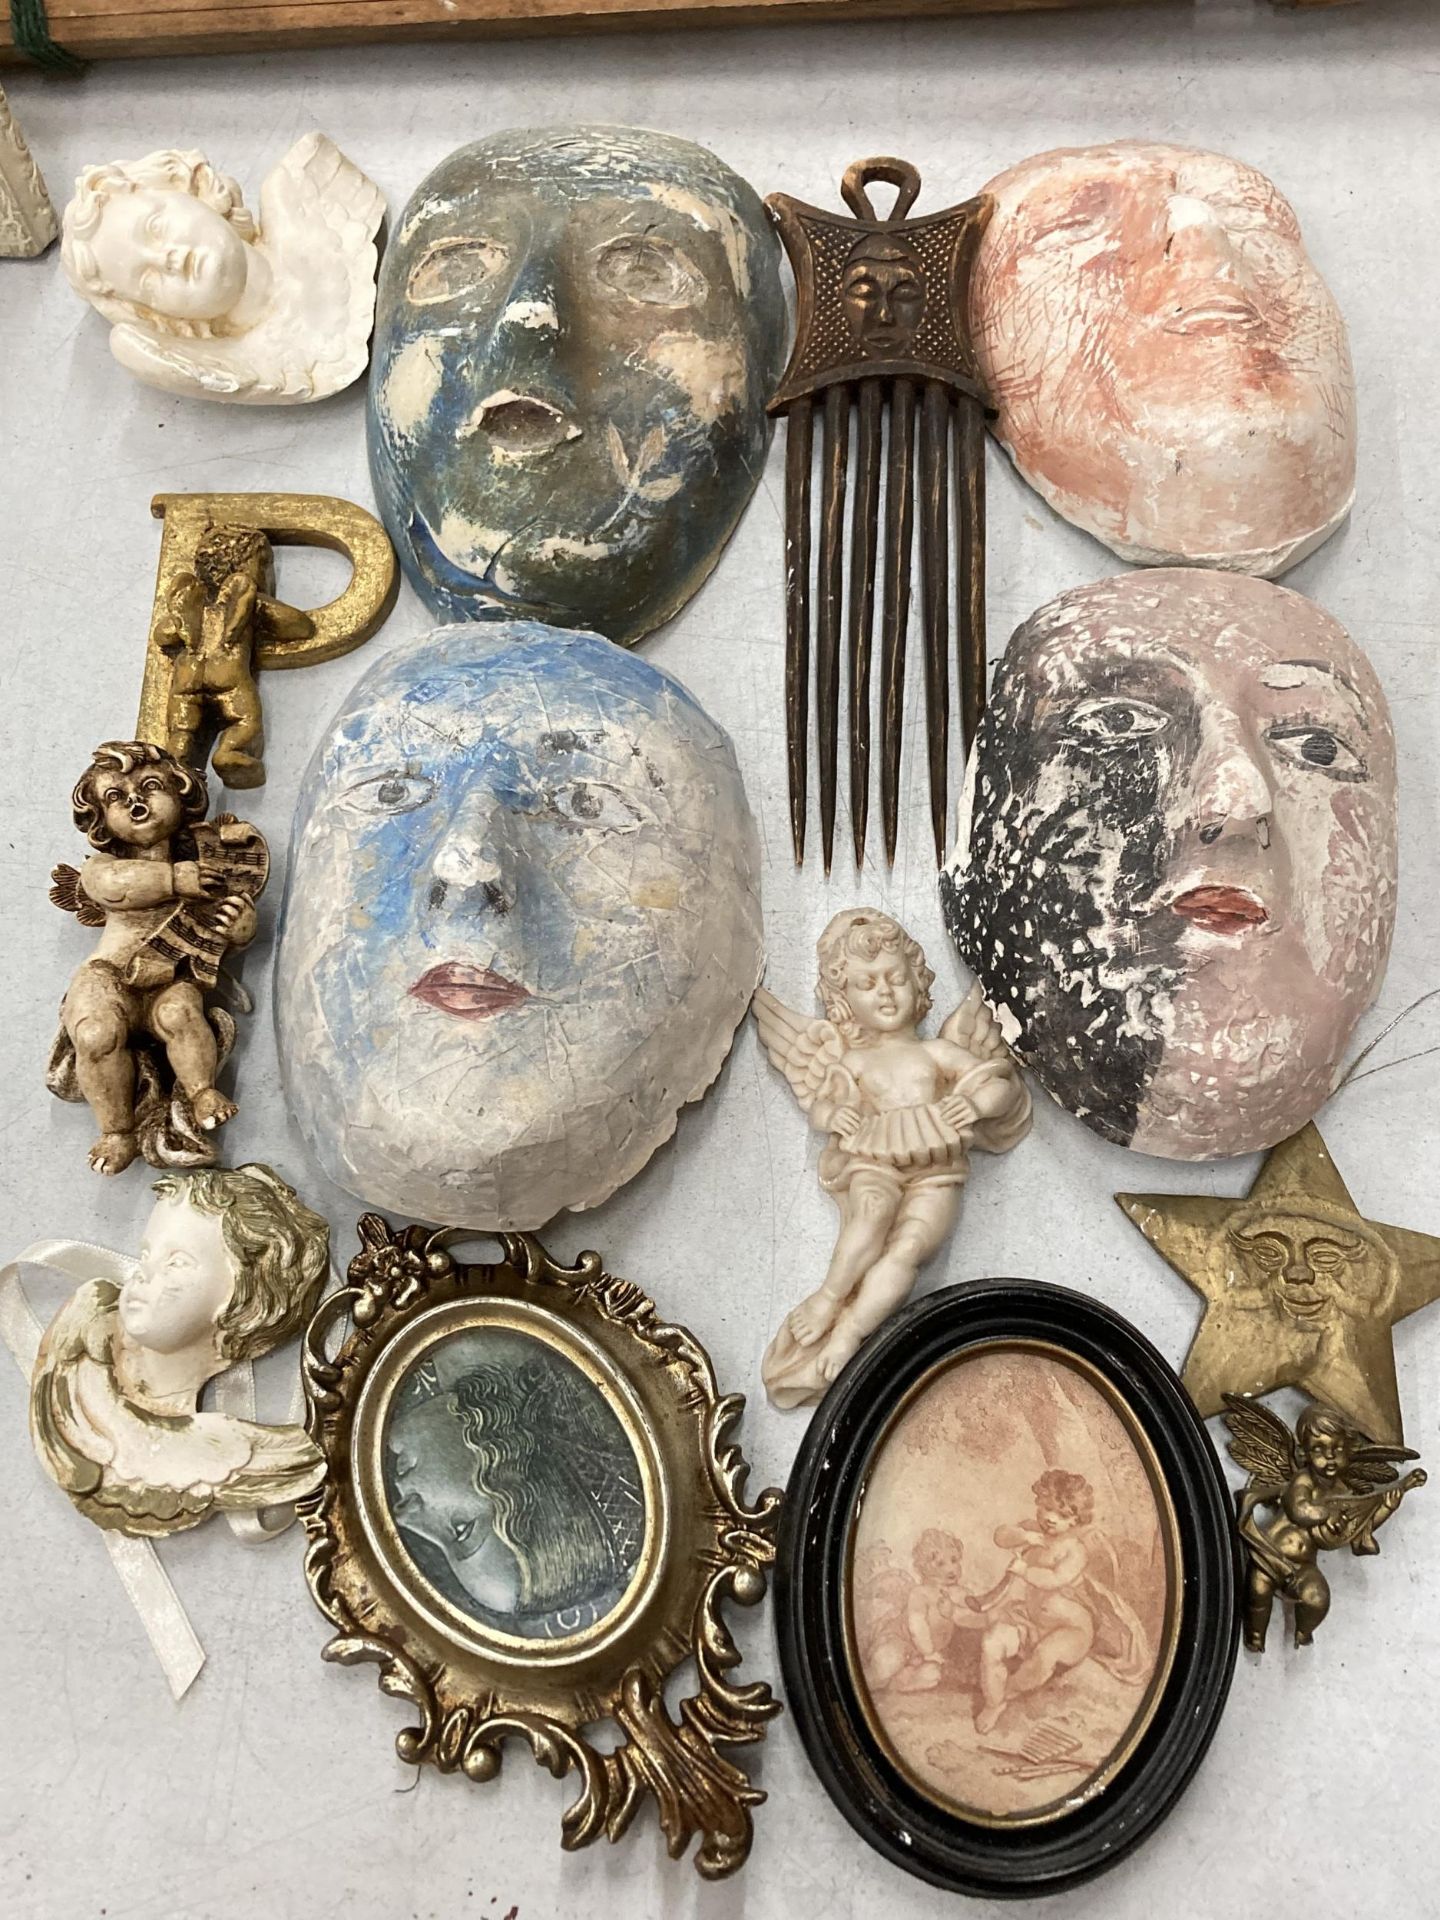 A MIXED LOT TO INCLUDE WALL MASKS, CHERUB WALL HANGINGS, SMALL PRINTS, ETC